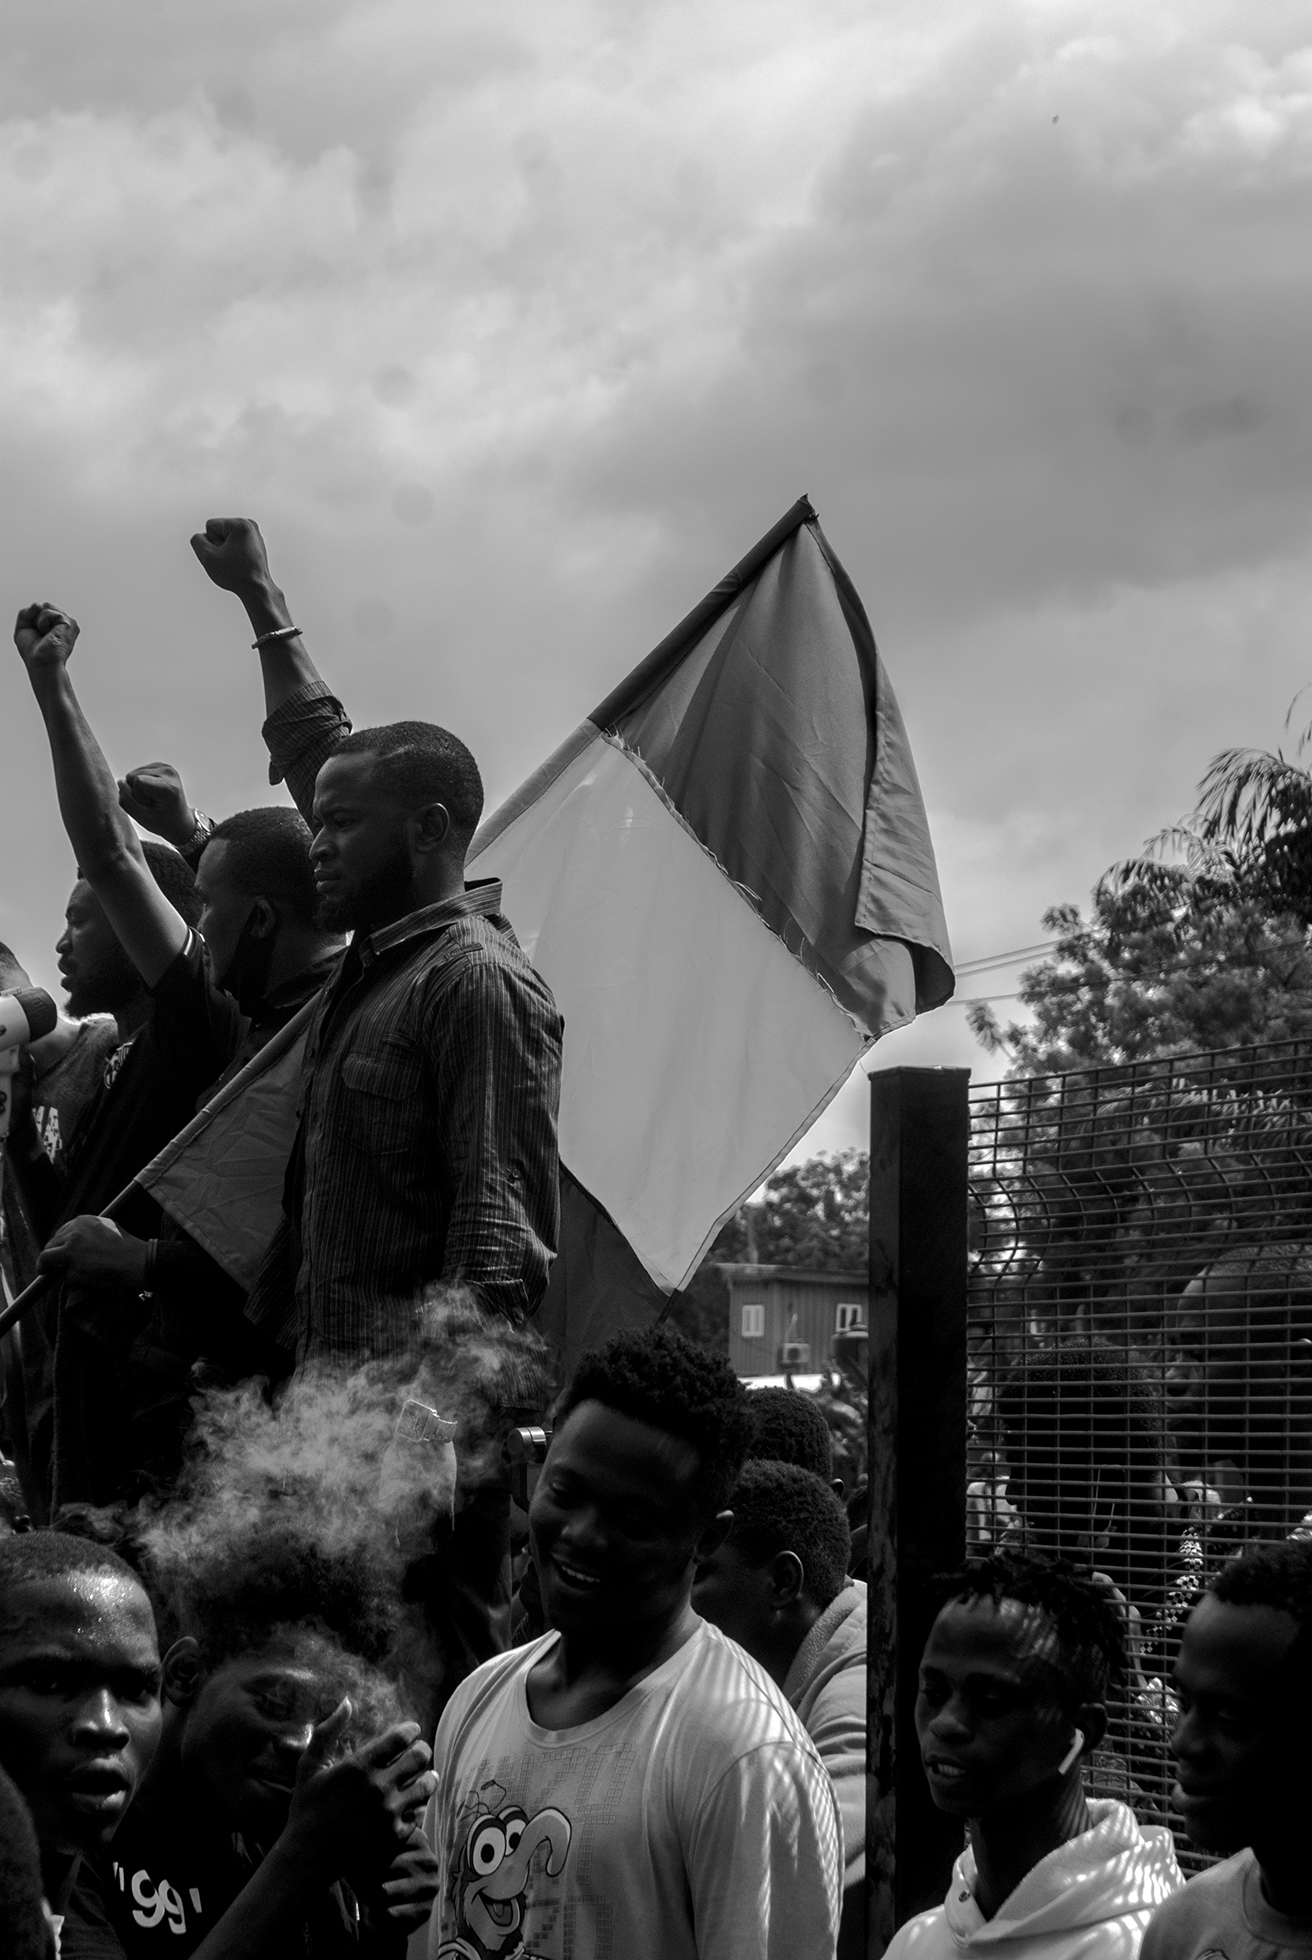 Protesters against police brutality in Lagos, Nigeria, in 2020. One protester has a flag and others have one arm raised with a closed fist.